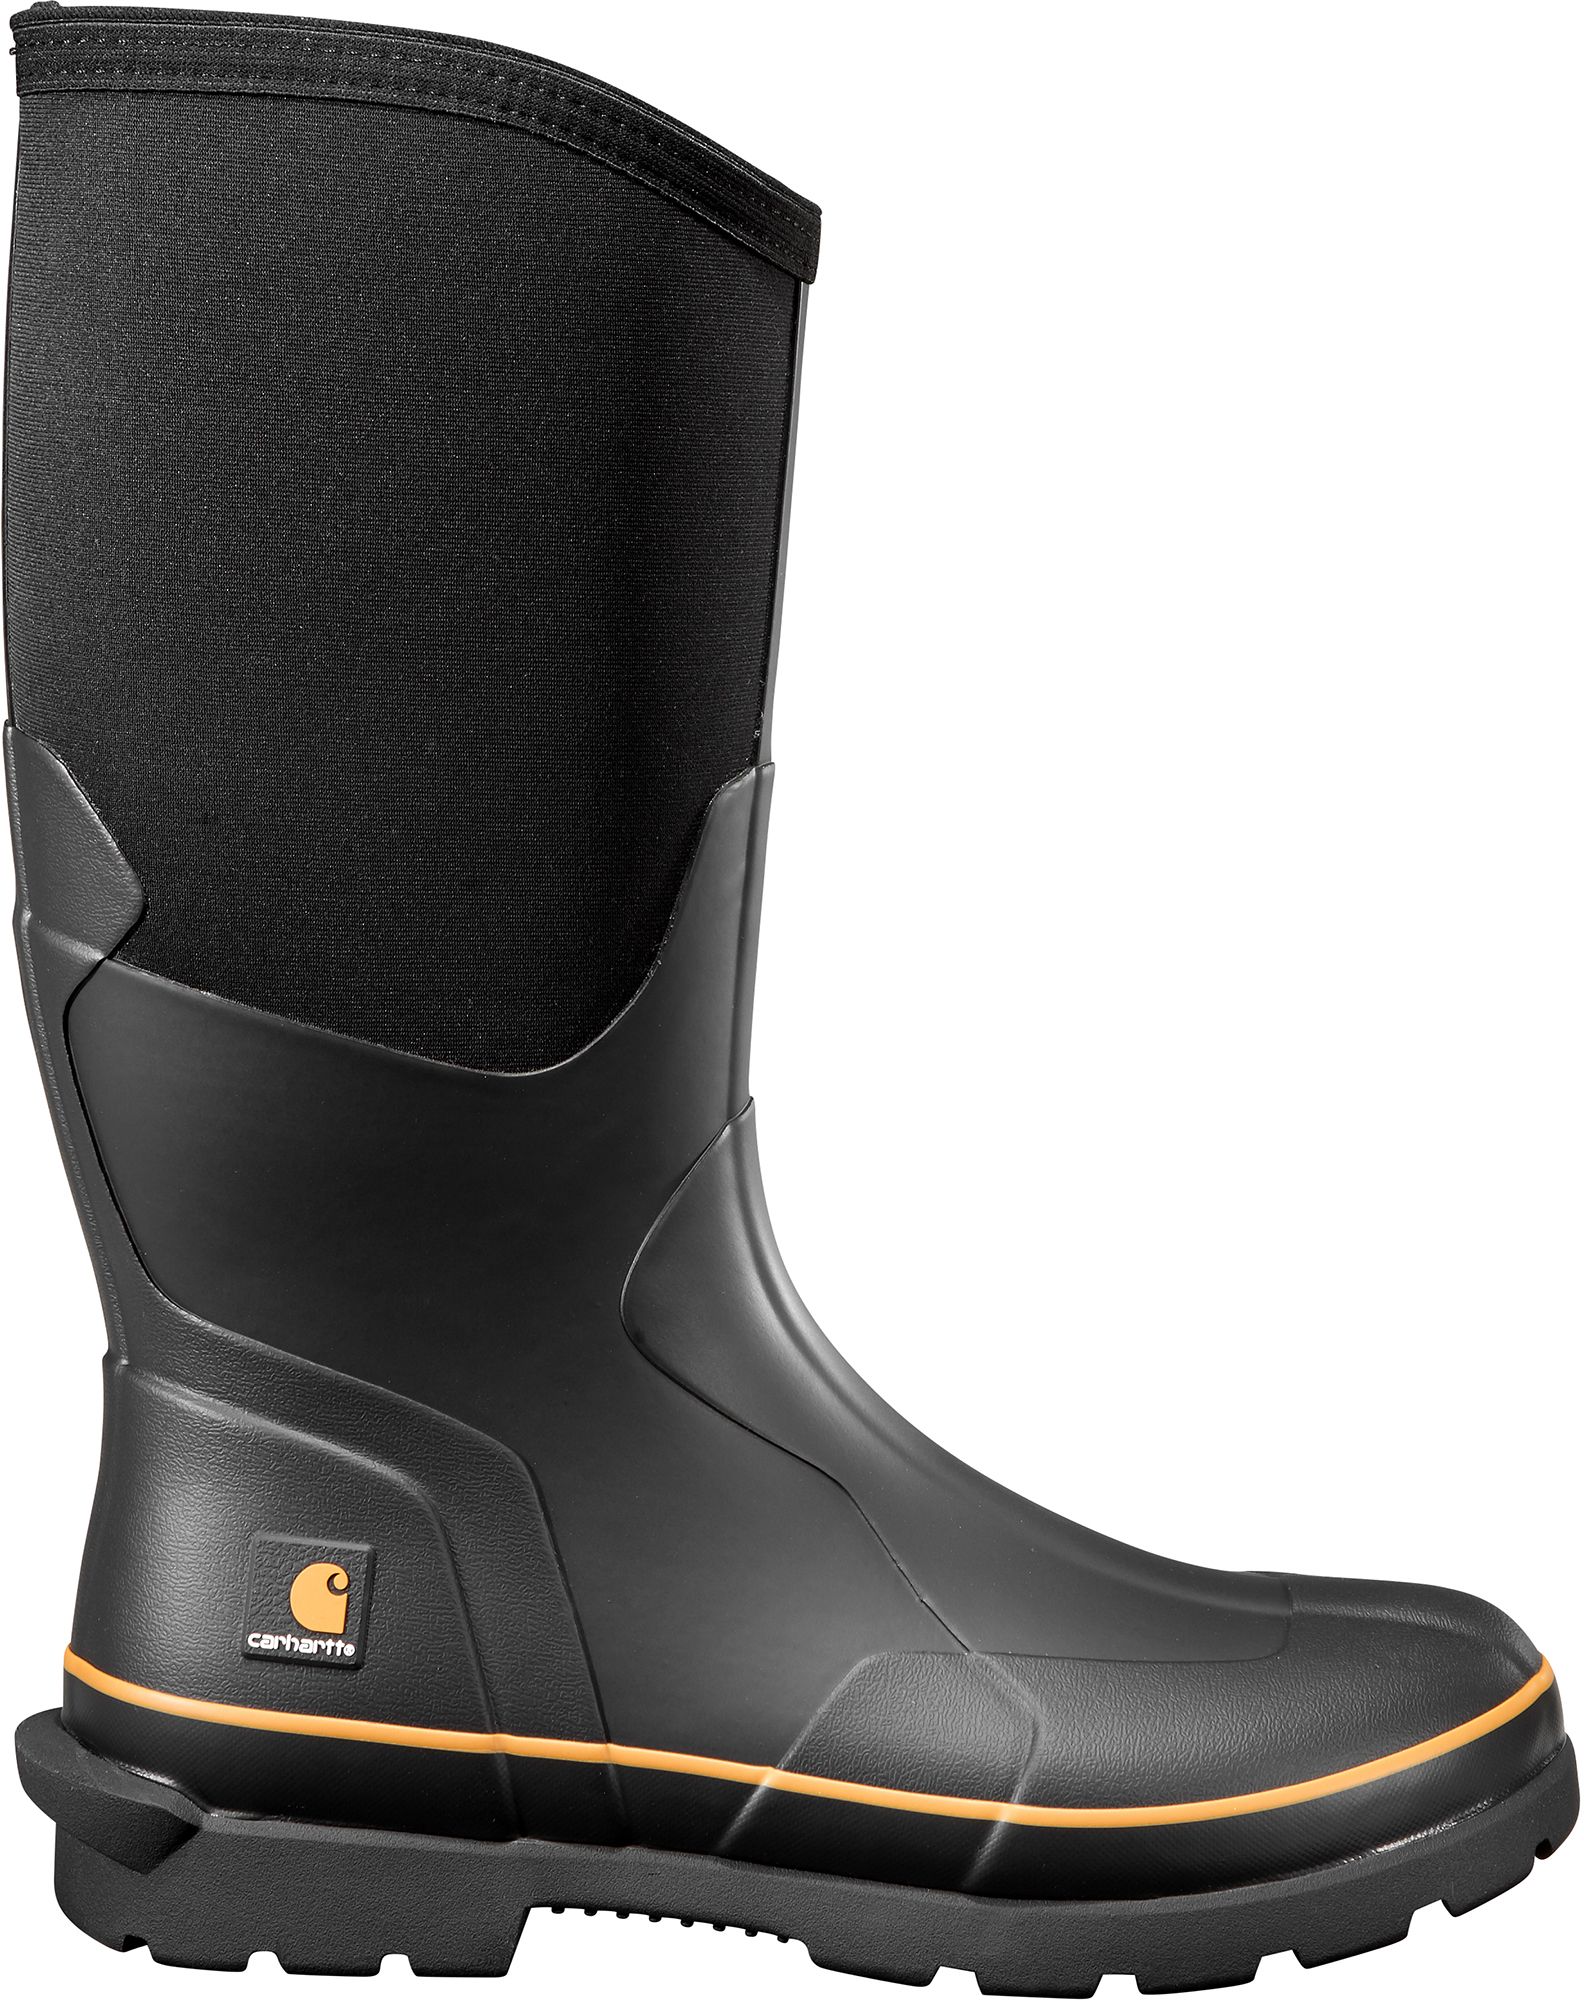 rubber boot cover